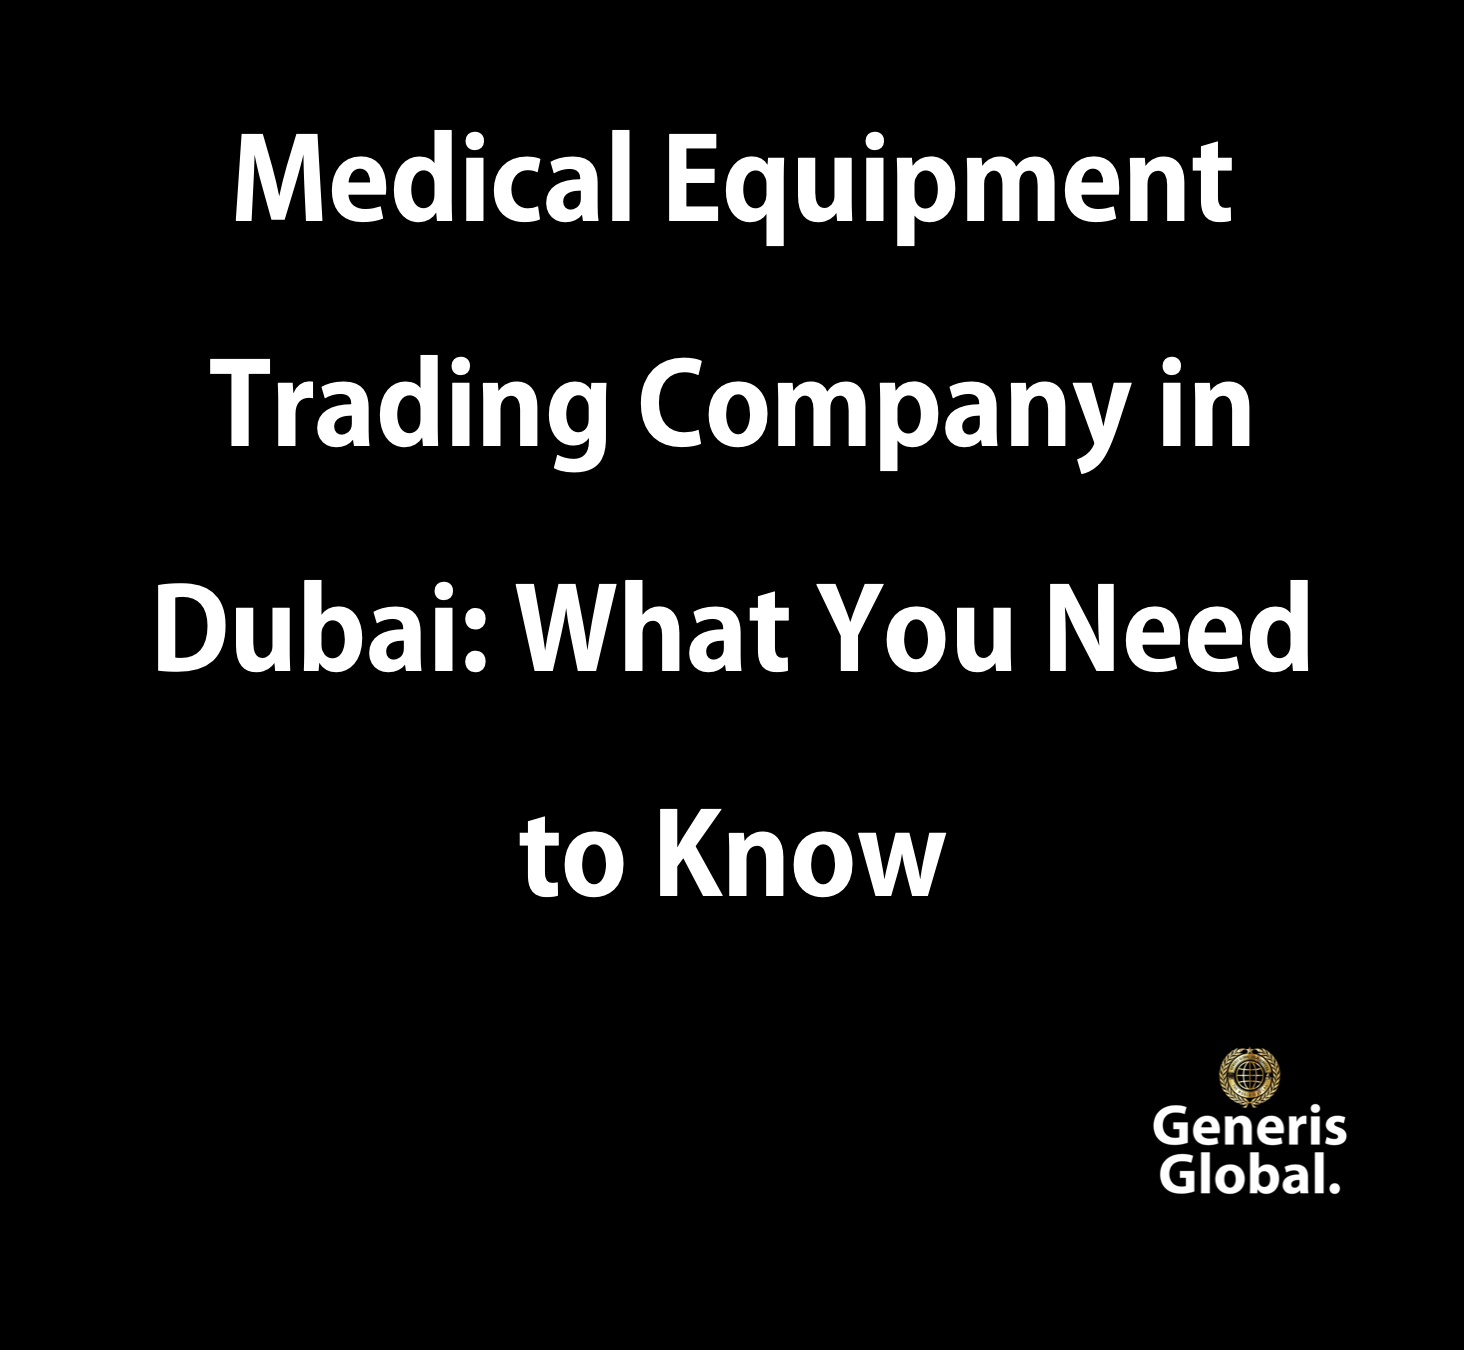 Medical Equipment Trading Company in Dubai: What You Need to Know